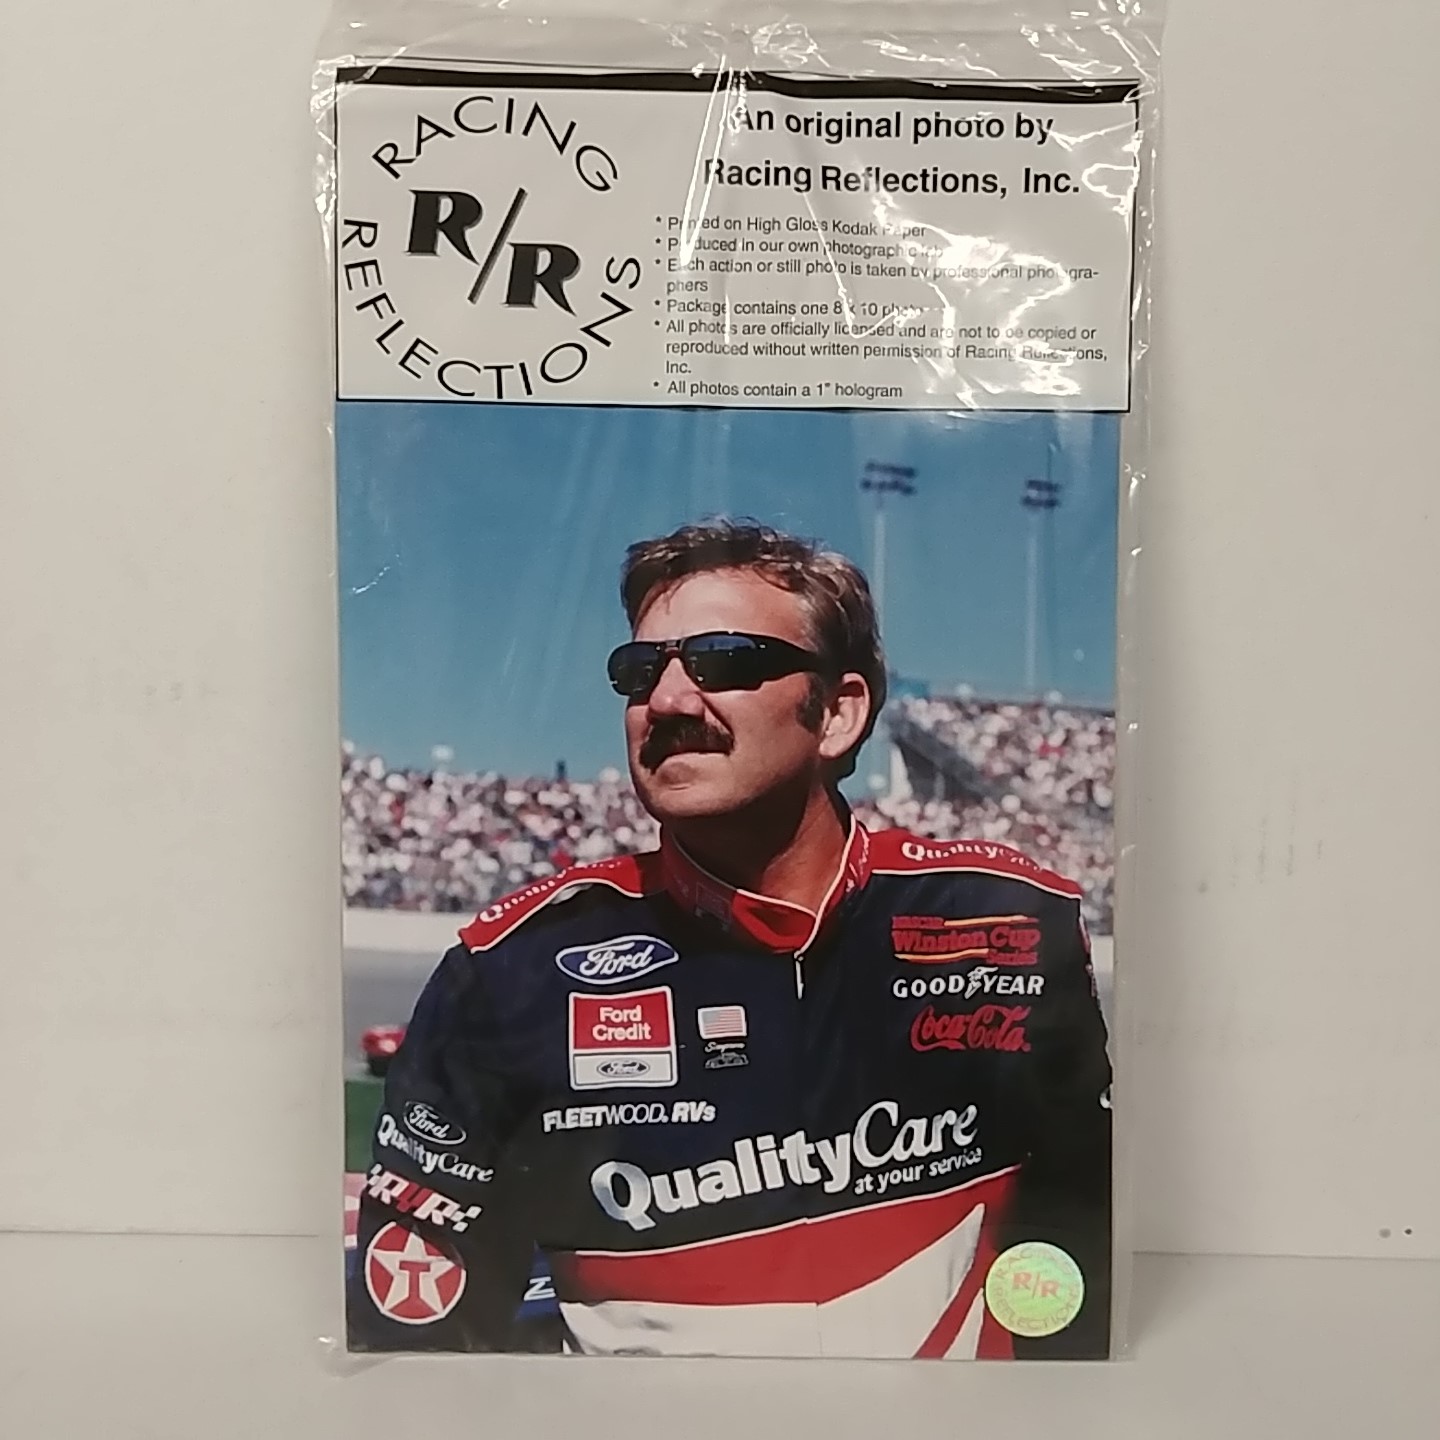 1999 Dale Jarrett Ford Quality Care Racing Reflections Photo